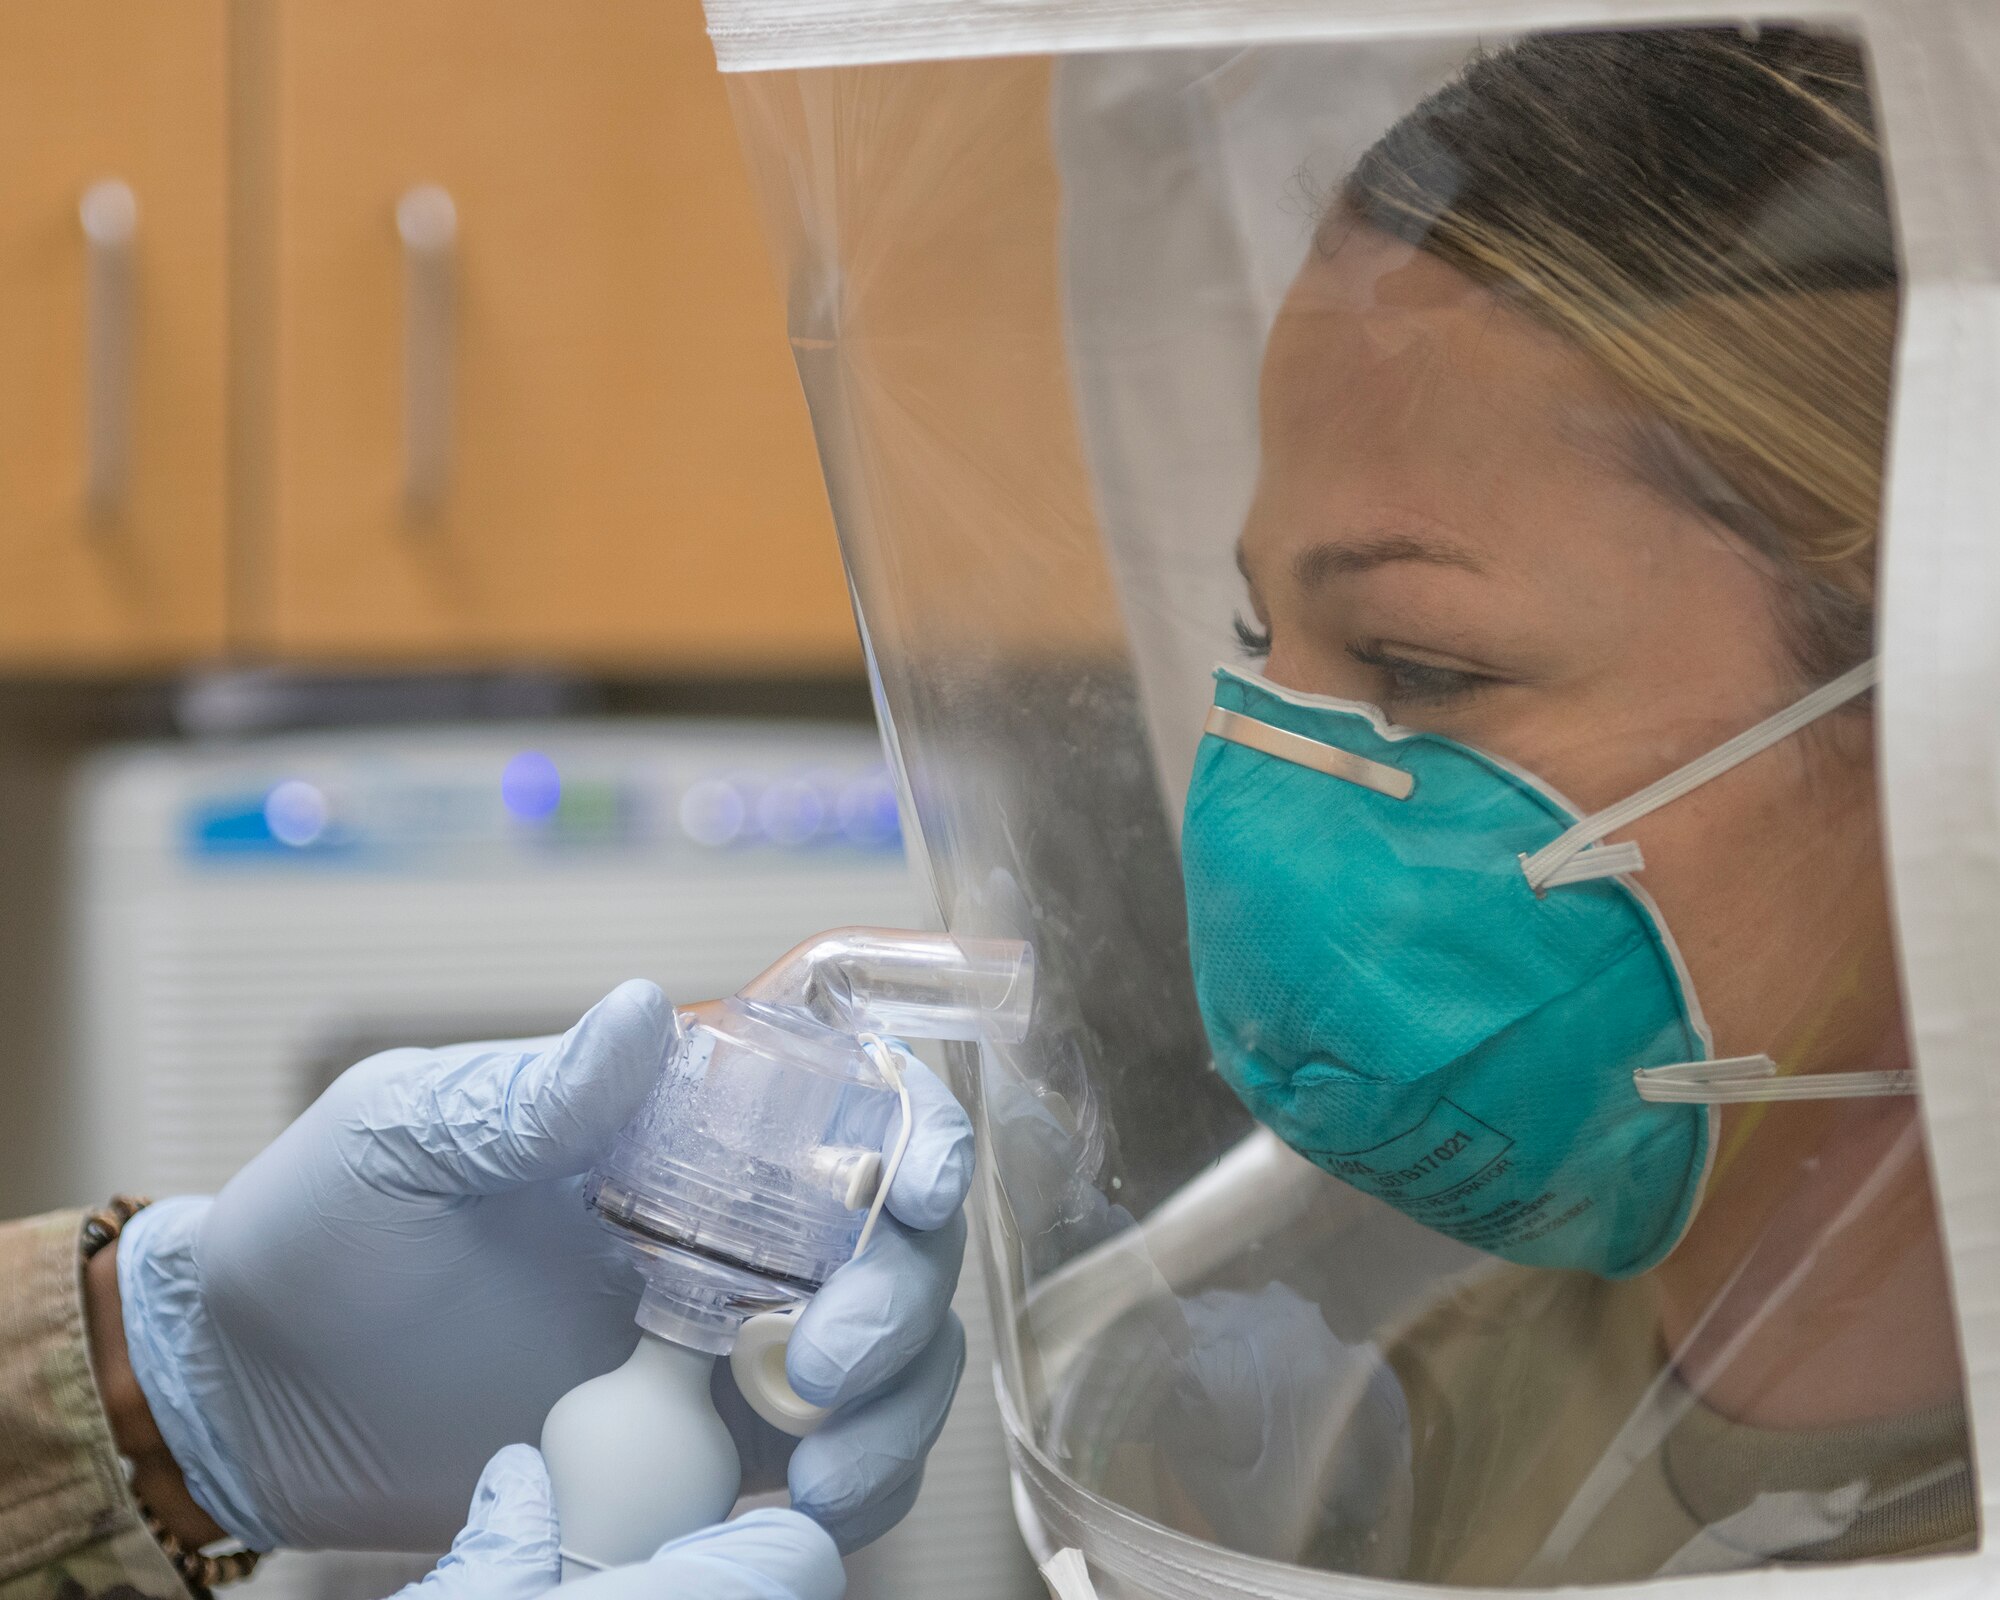 Staff Sgt. Beth Kenney, 56th Dental Squadron dental assistant, wears a N95 respirator mask while misted with a sensitivity and fit test solution April 1, 2020, at Luke Air Force Base, Ariz.